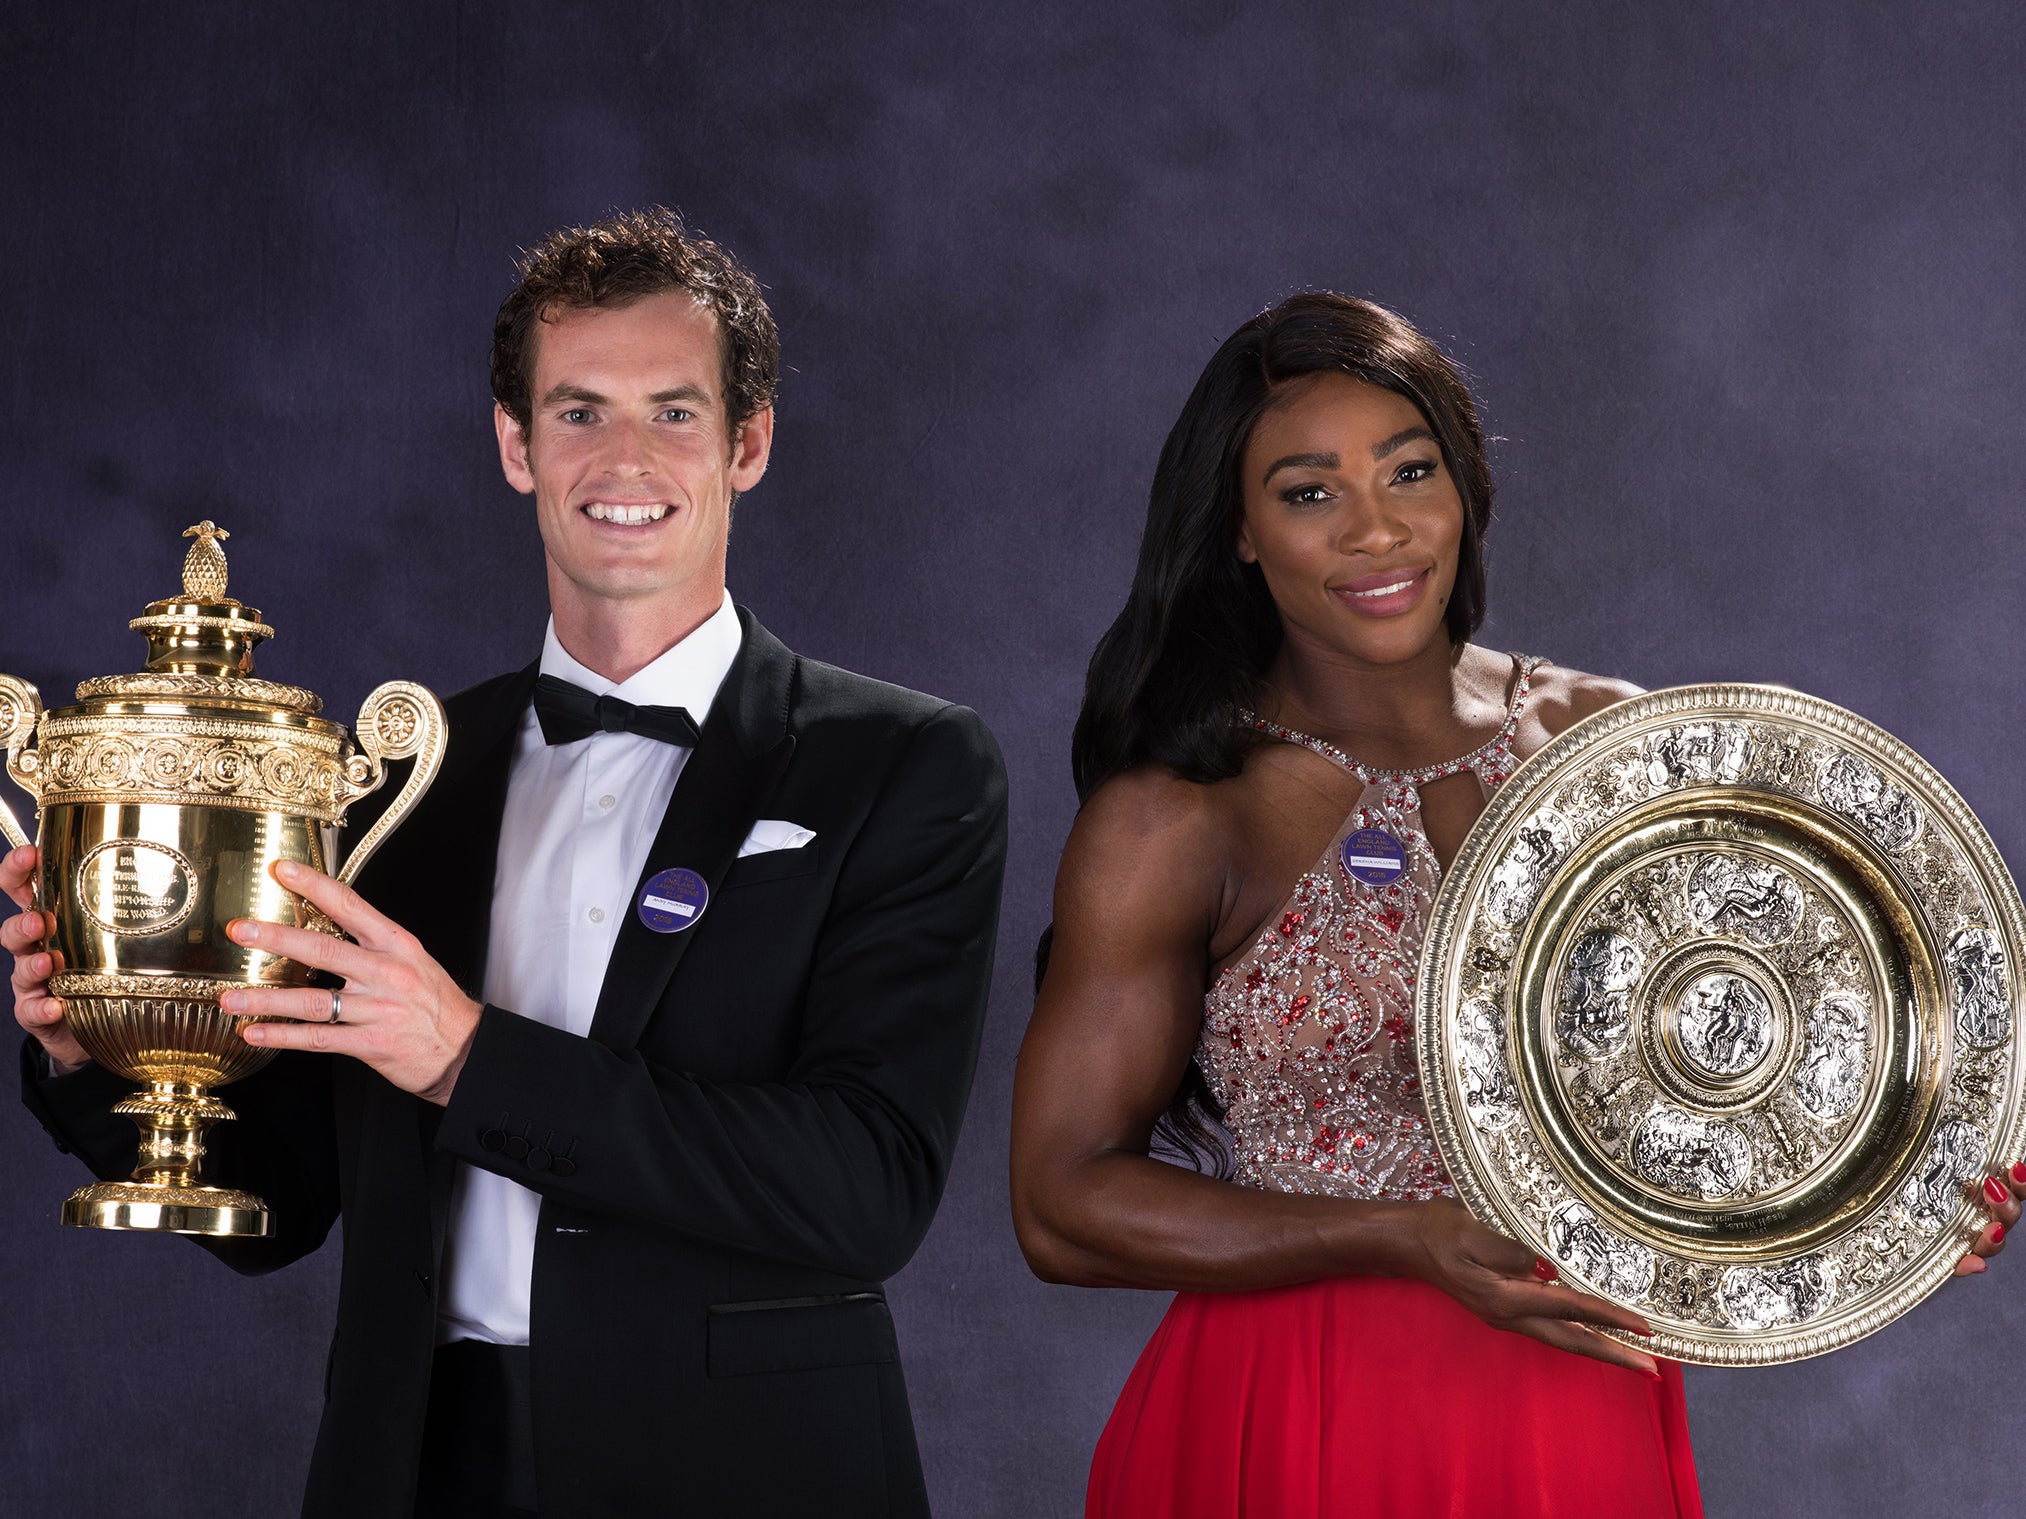 Andy Murray and Serena Williams to pair up for mixed doubles at Wimbledon 2019